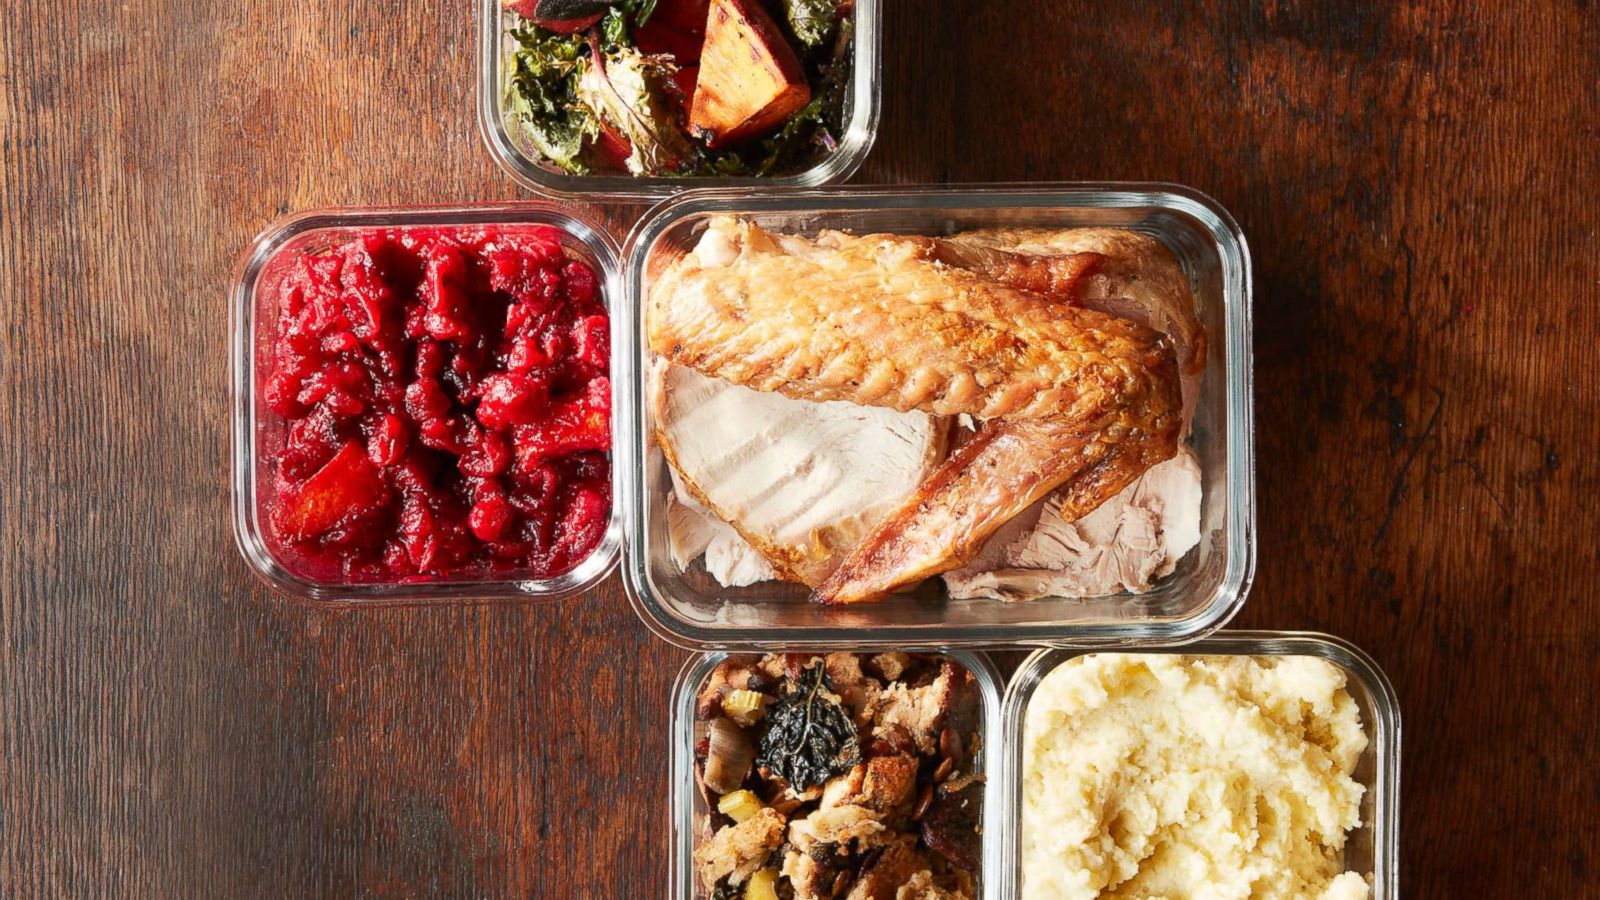 How to travel with Thanksgiving leftovers